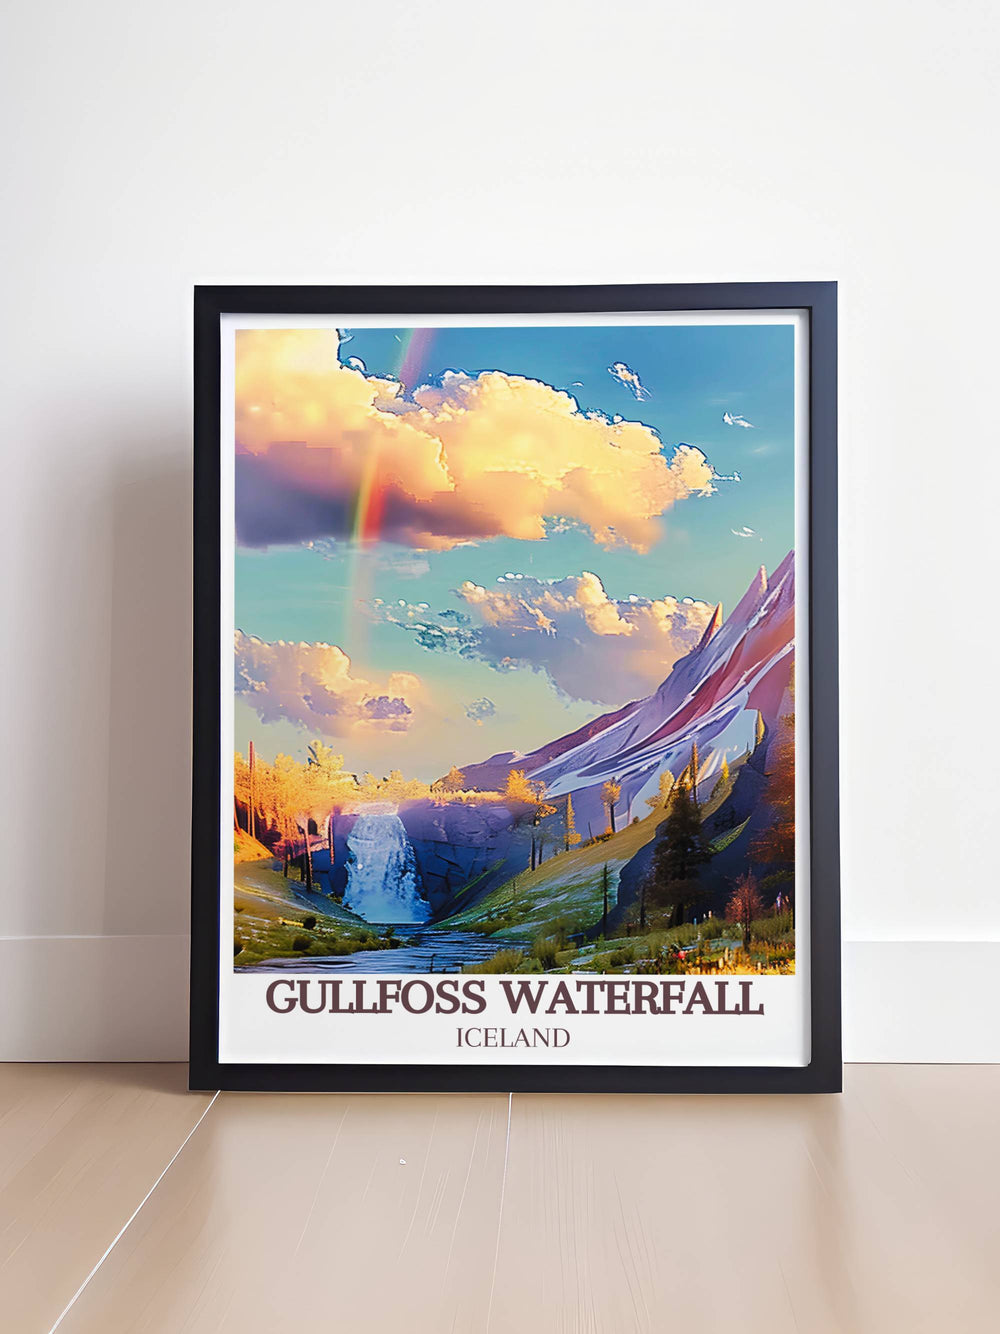 Vibrant colors of the rainbow arching over the icy waters of Gullfoss, captured in a high quality Iceland travel print